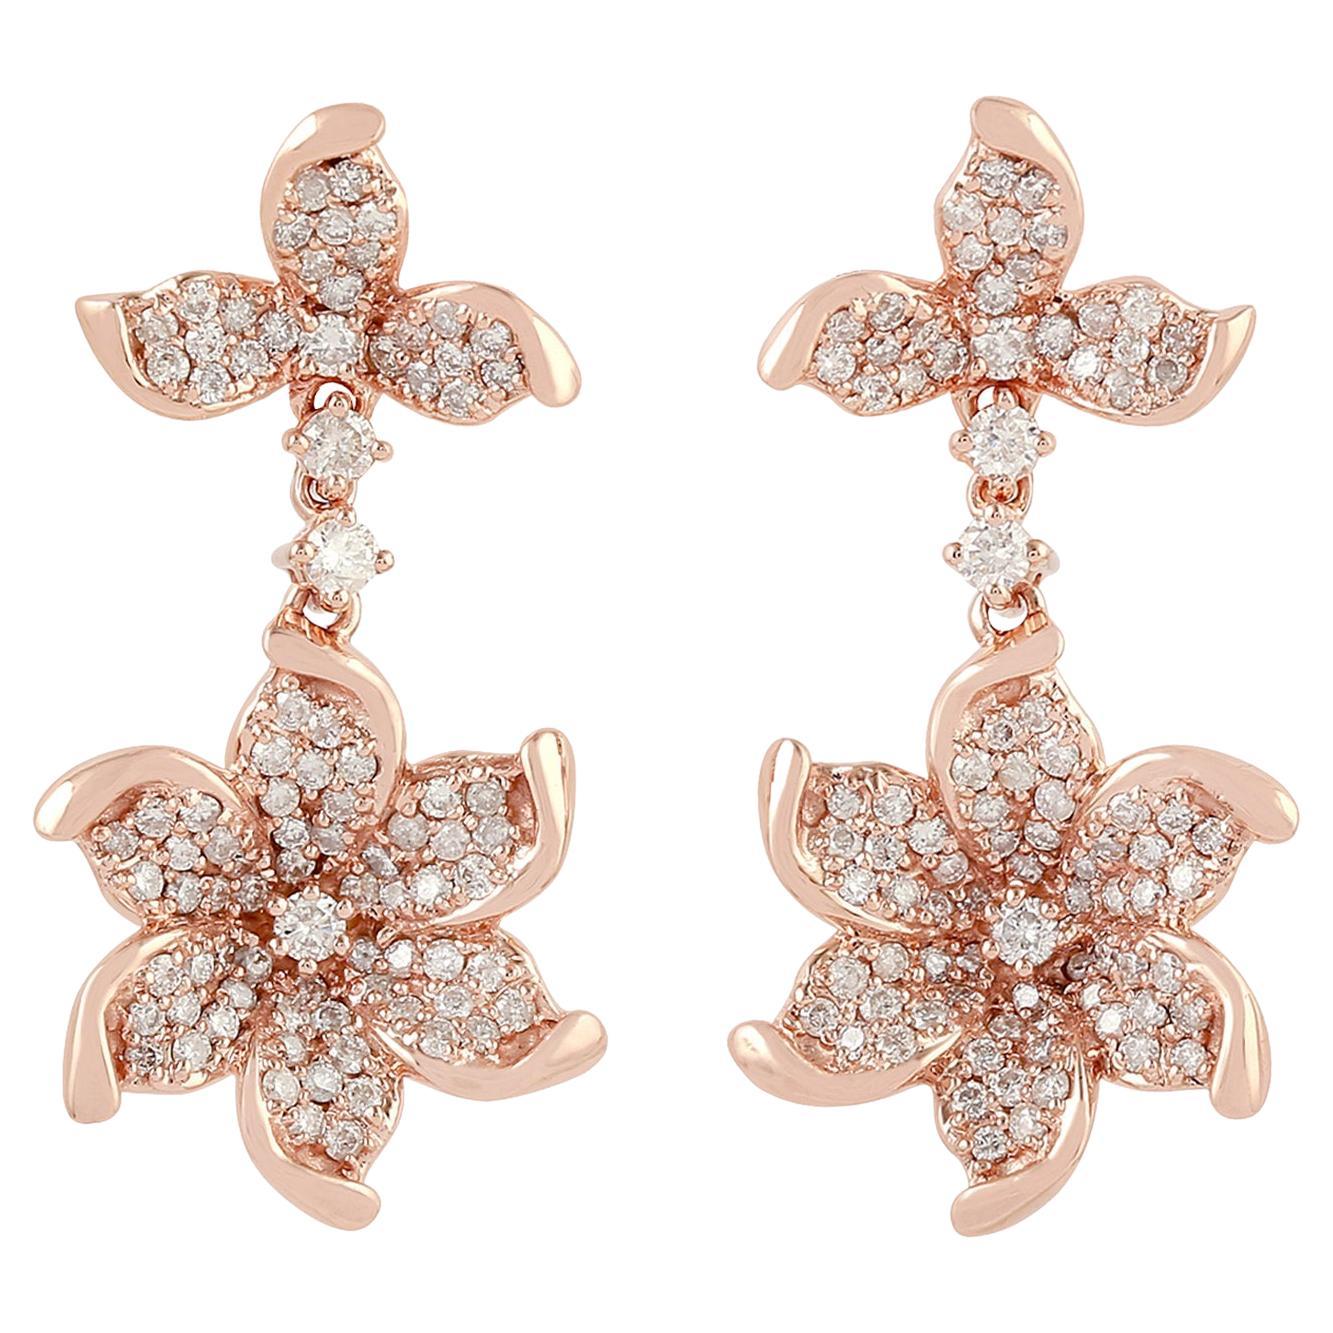 Designer Floral Pattern Earrings with Pave Diamonds Made in 18k Rose Gold For Sale